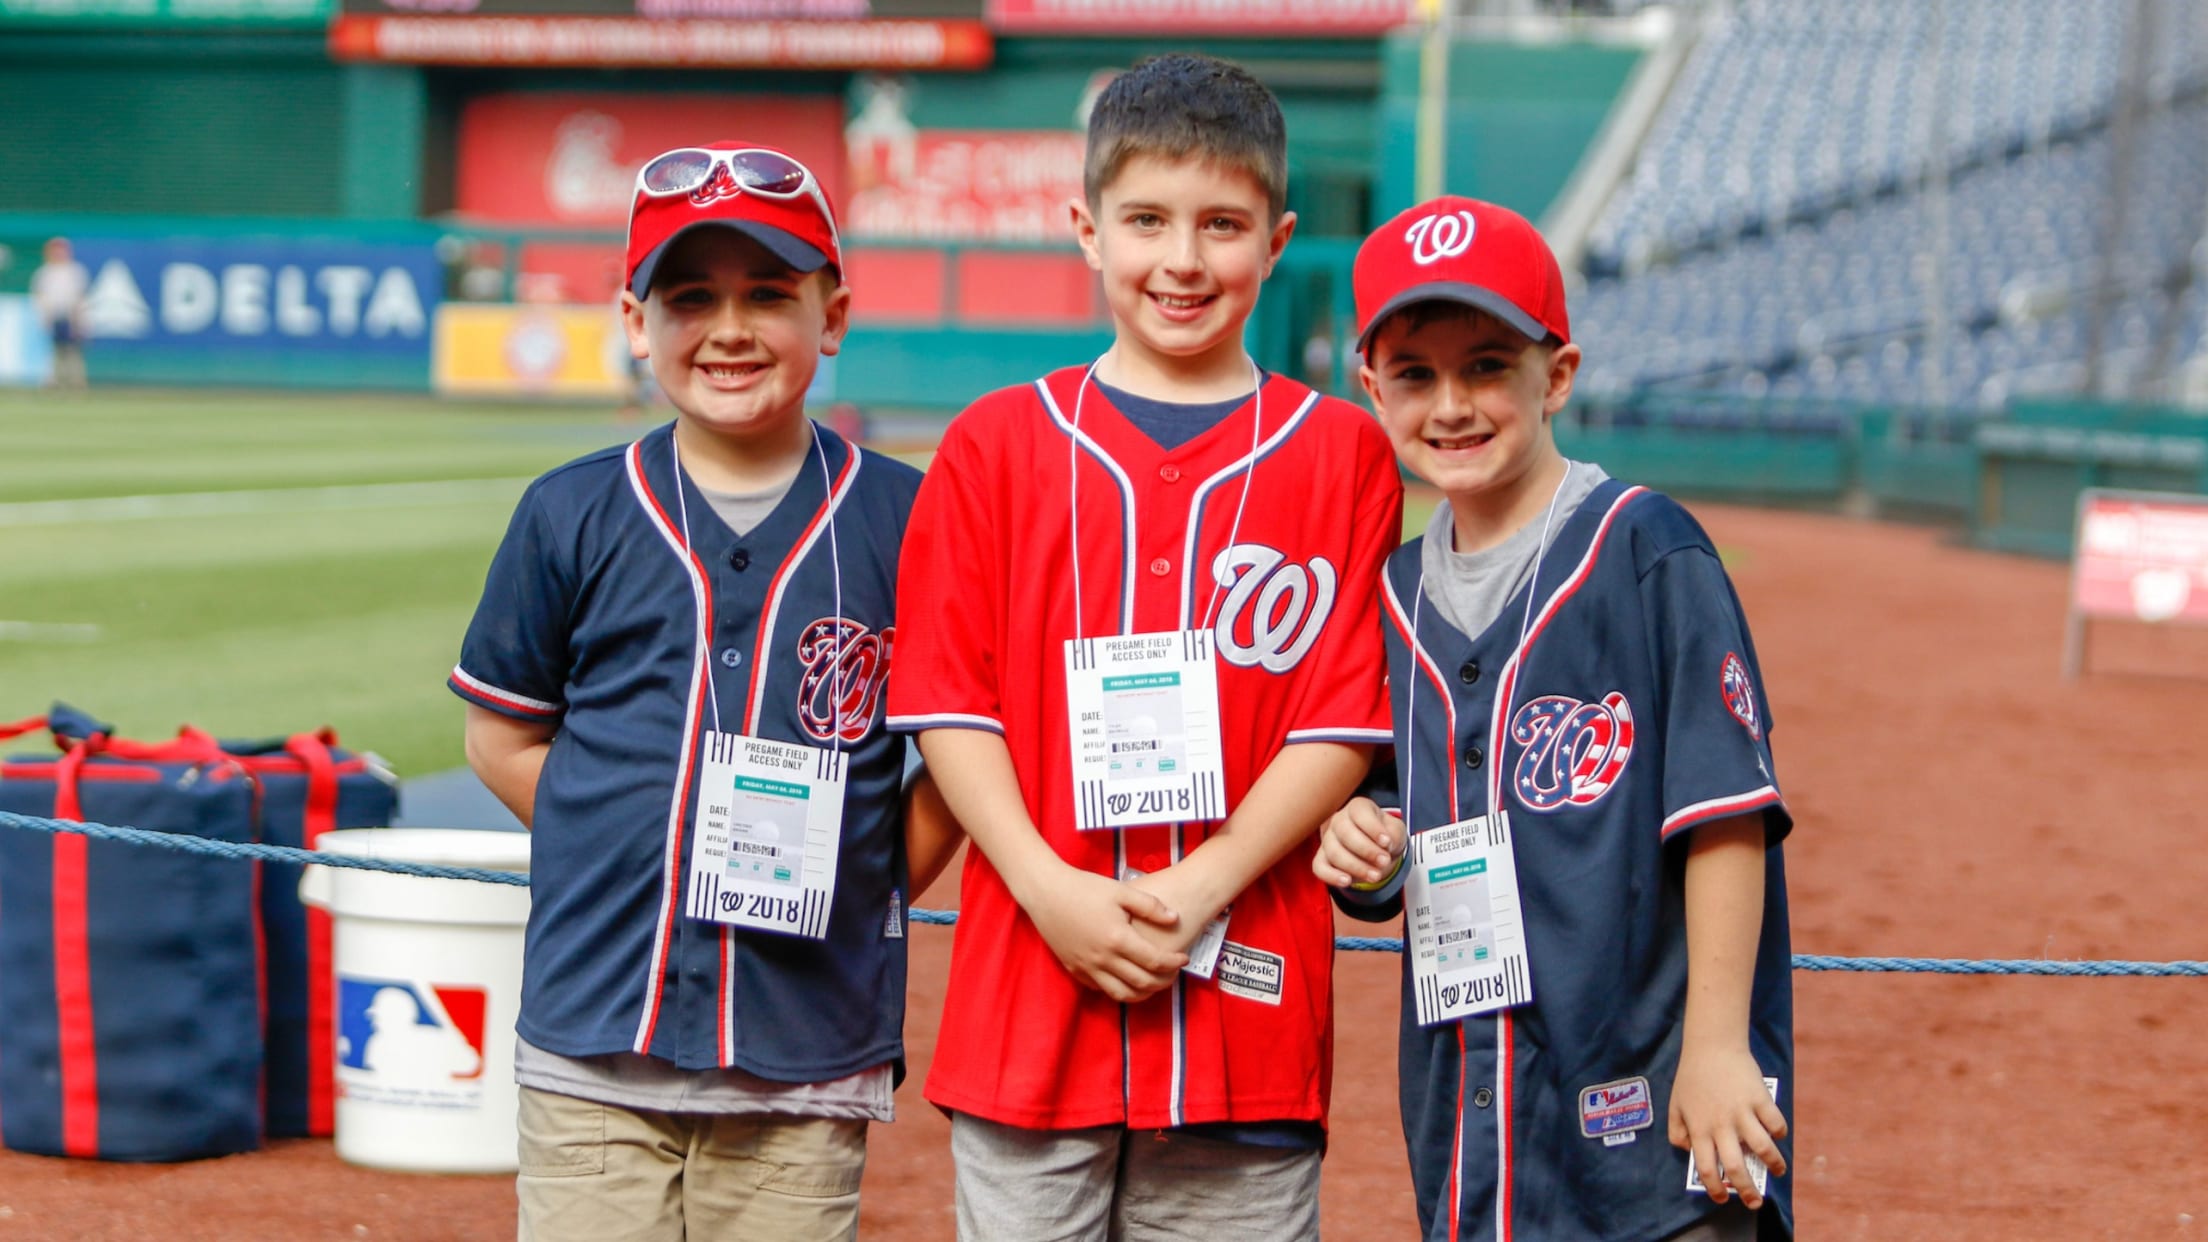 Washington Nationals family friendly features + discount code for